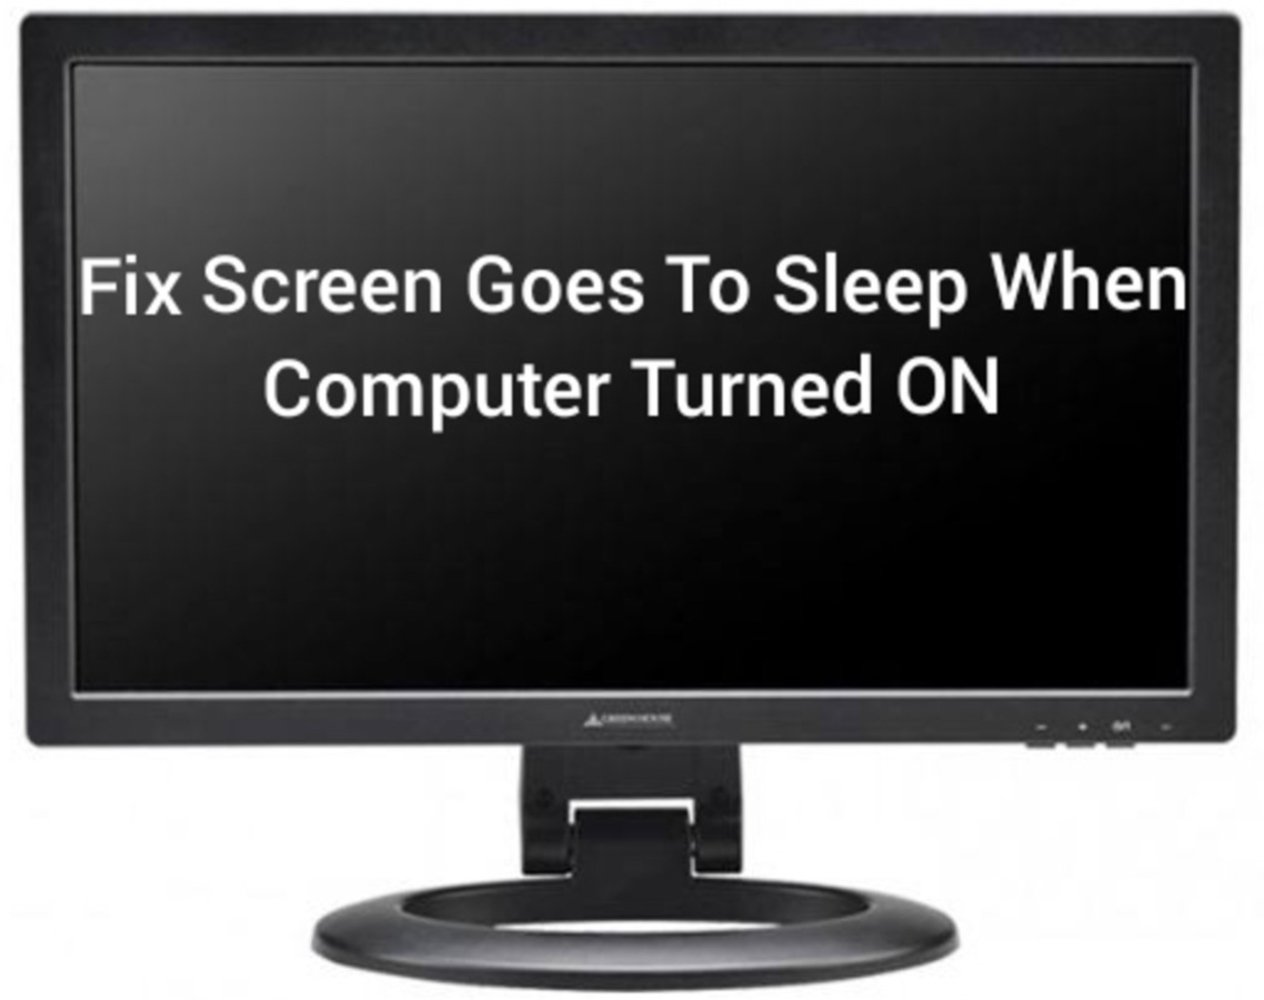 Fix-Screen-Goes-to-Sleep-When-Computer-is-Turned-ON